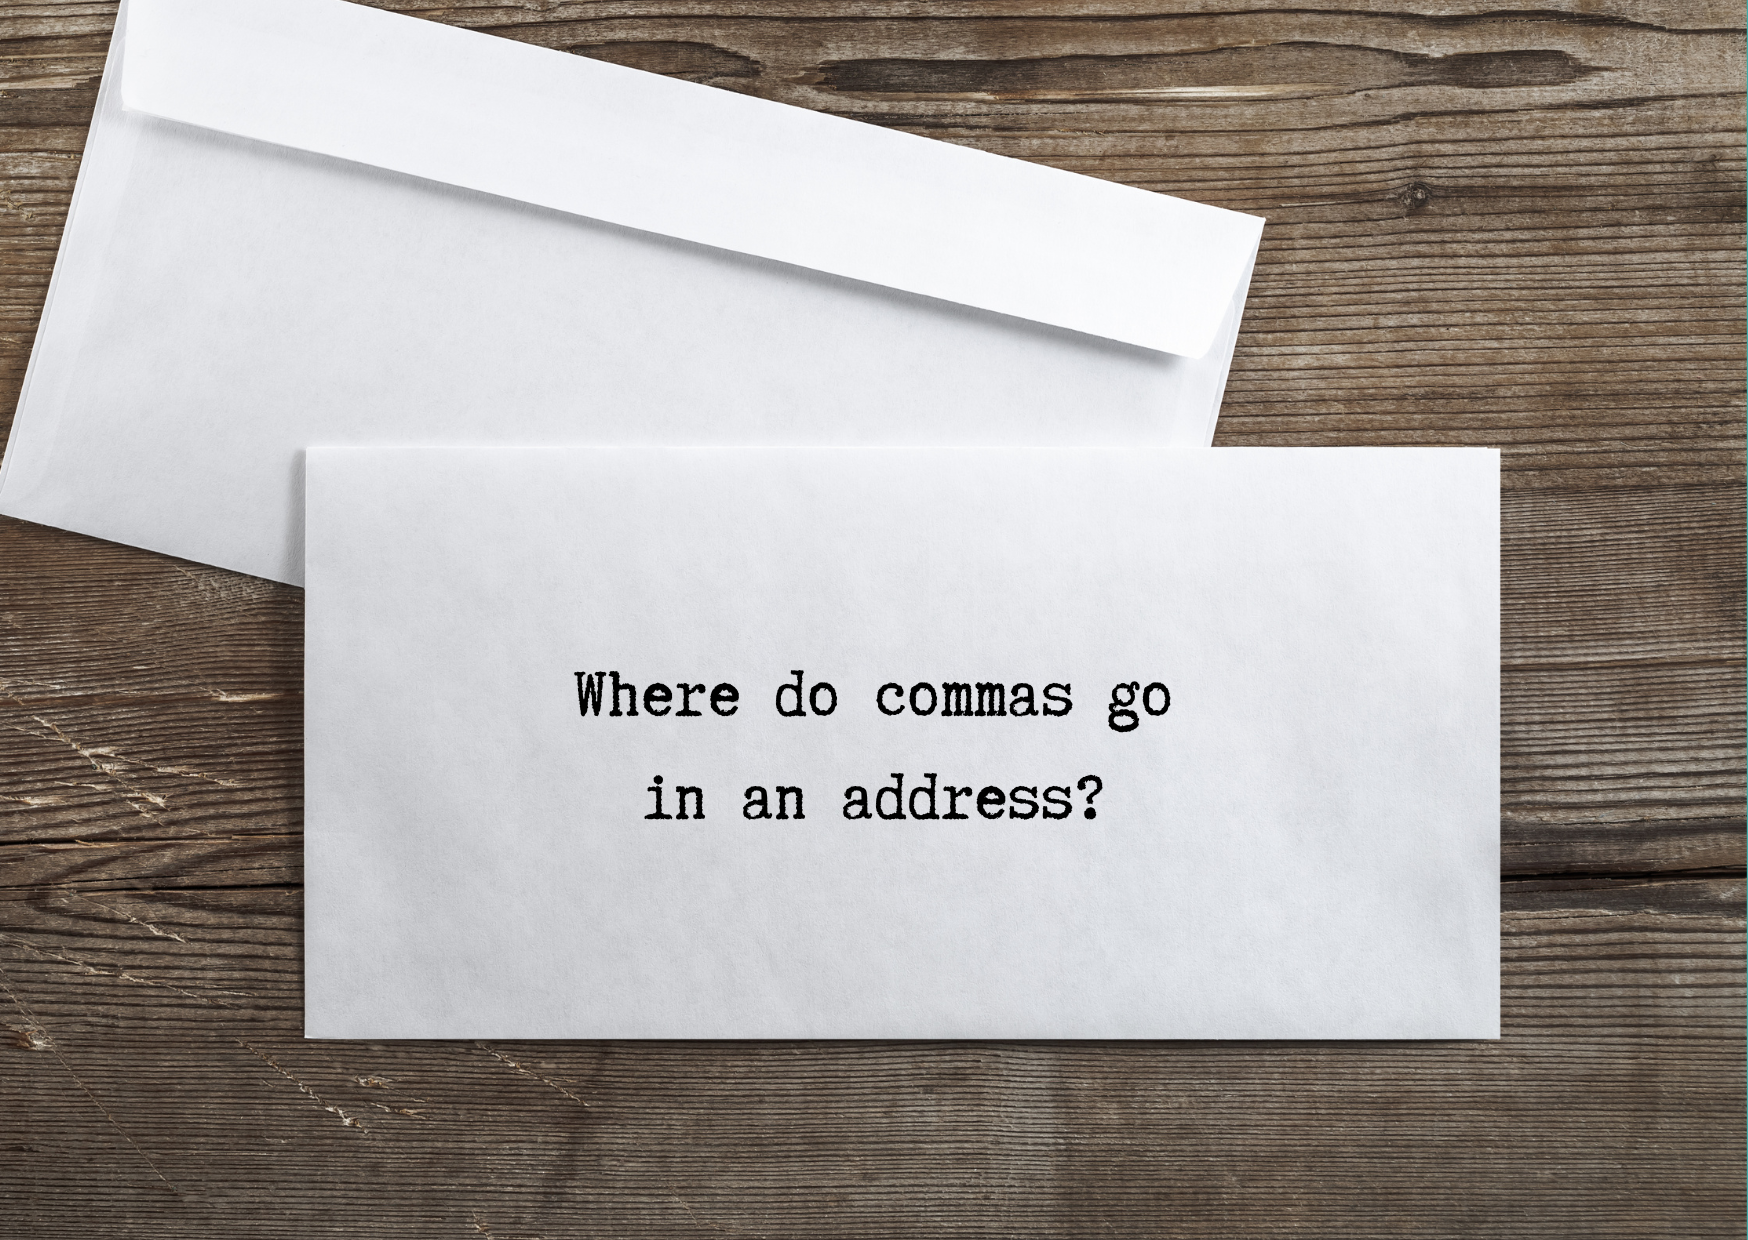 Address punctuation: A picture of two envelopes on a wooden table. The text "does punctuation go inside parentheses" is written in the space where the address should be written in order to signify